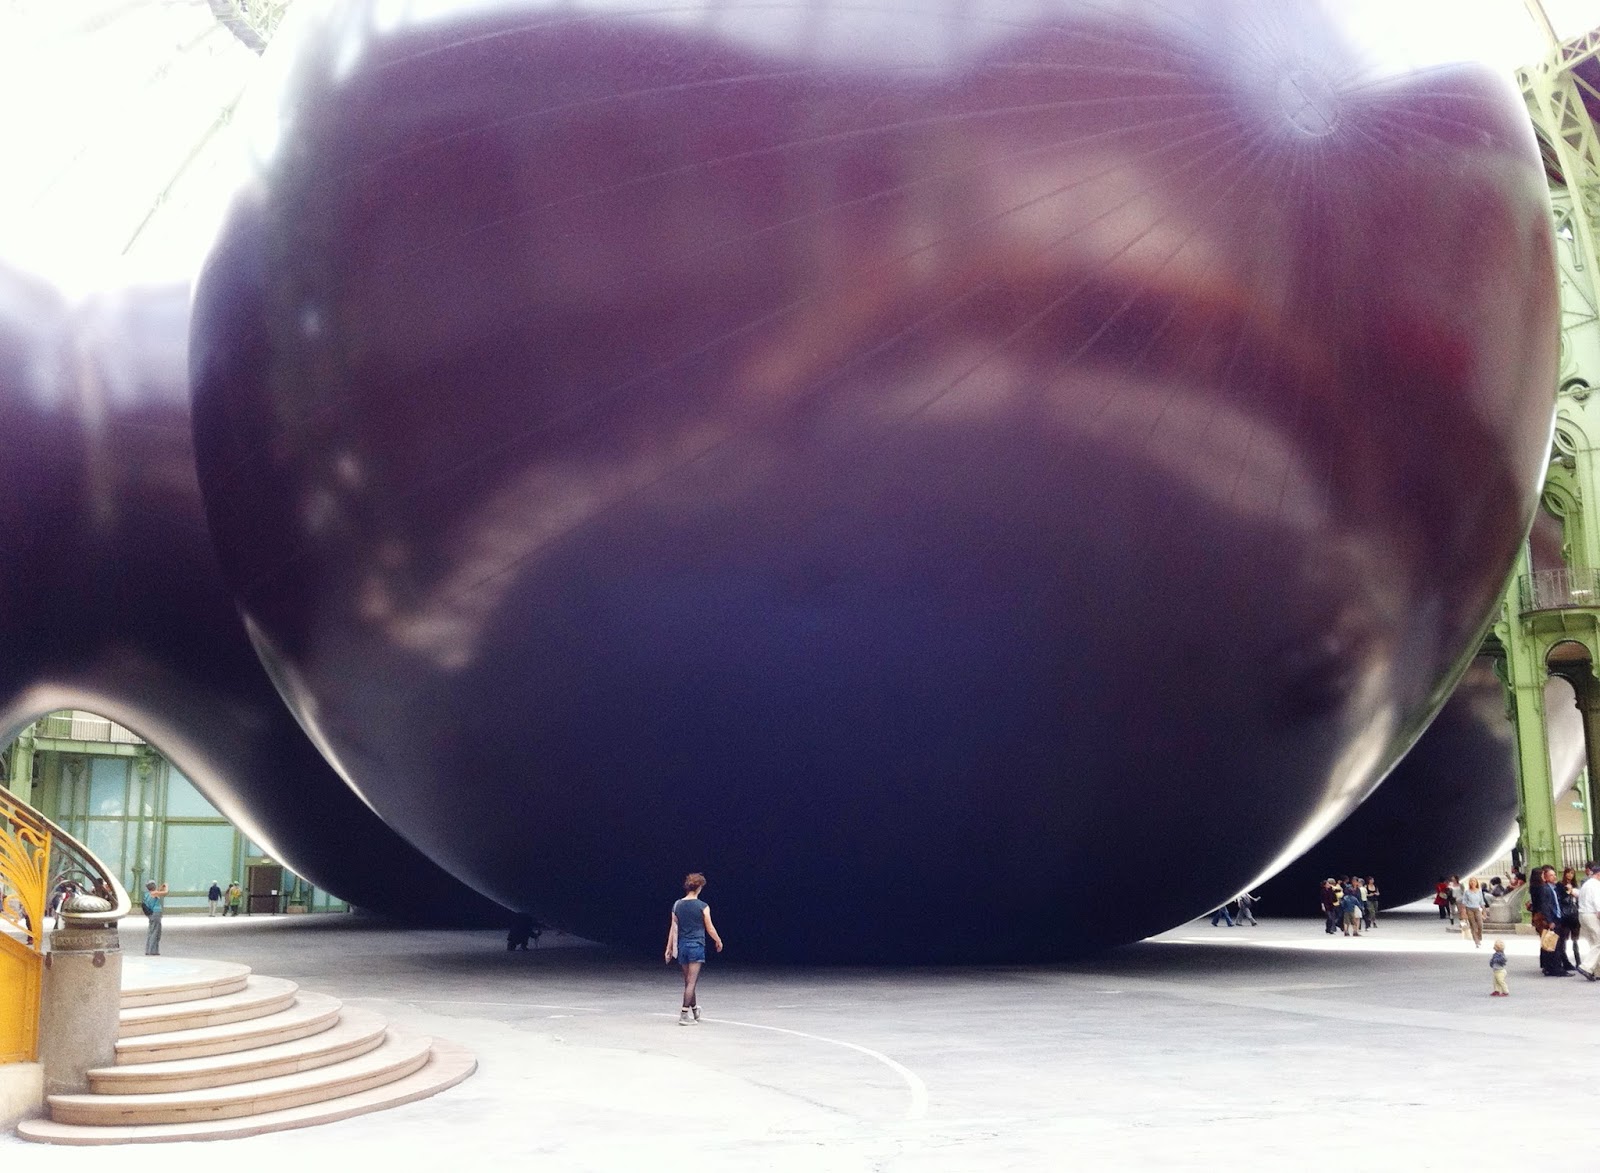 A spectator stands in front of a massive spherical sculpture, over 30m in height. 